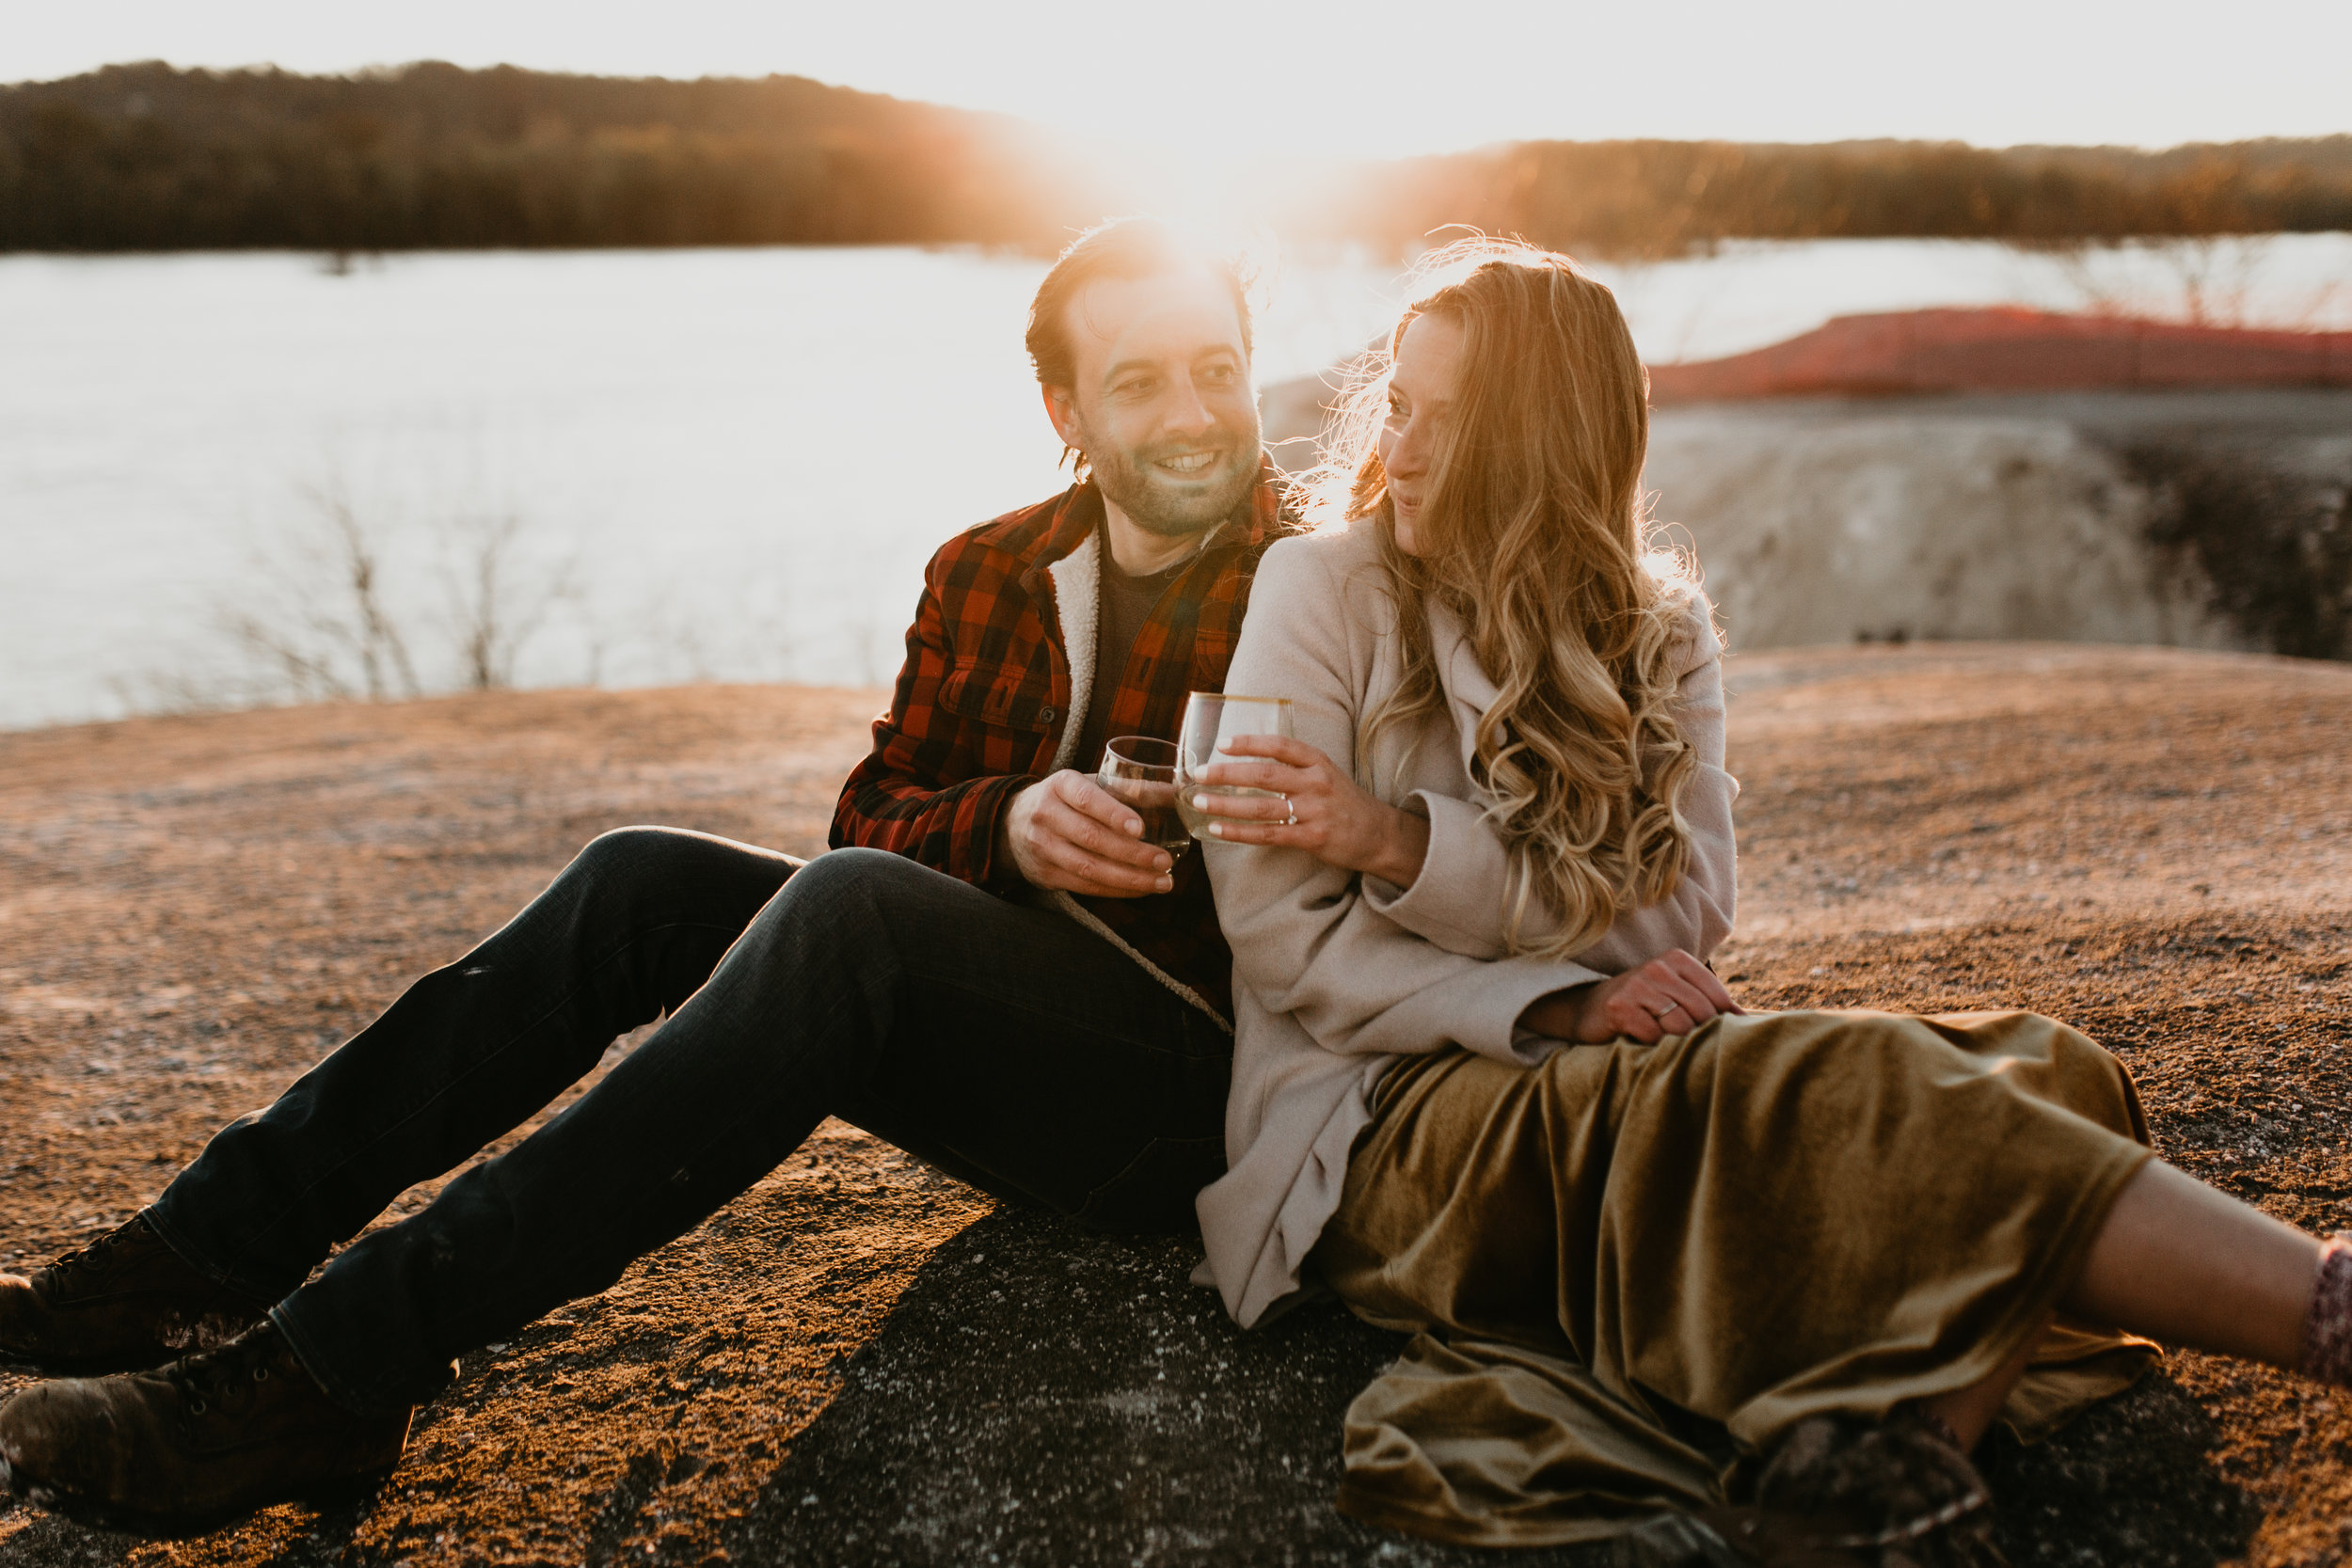 nicole-daacke-photography-white-cliffs-of-conoy-in-lancaster-pa-pennsylvania-adventure-session-adventure-elopement-photographer-engagement session-in-lancaster-pa-photographer-golden-sunset-winter-solstice-wedding-riverside-elopement-4142.jpg